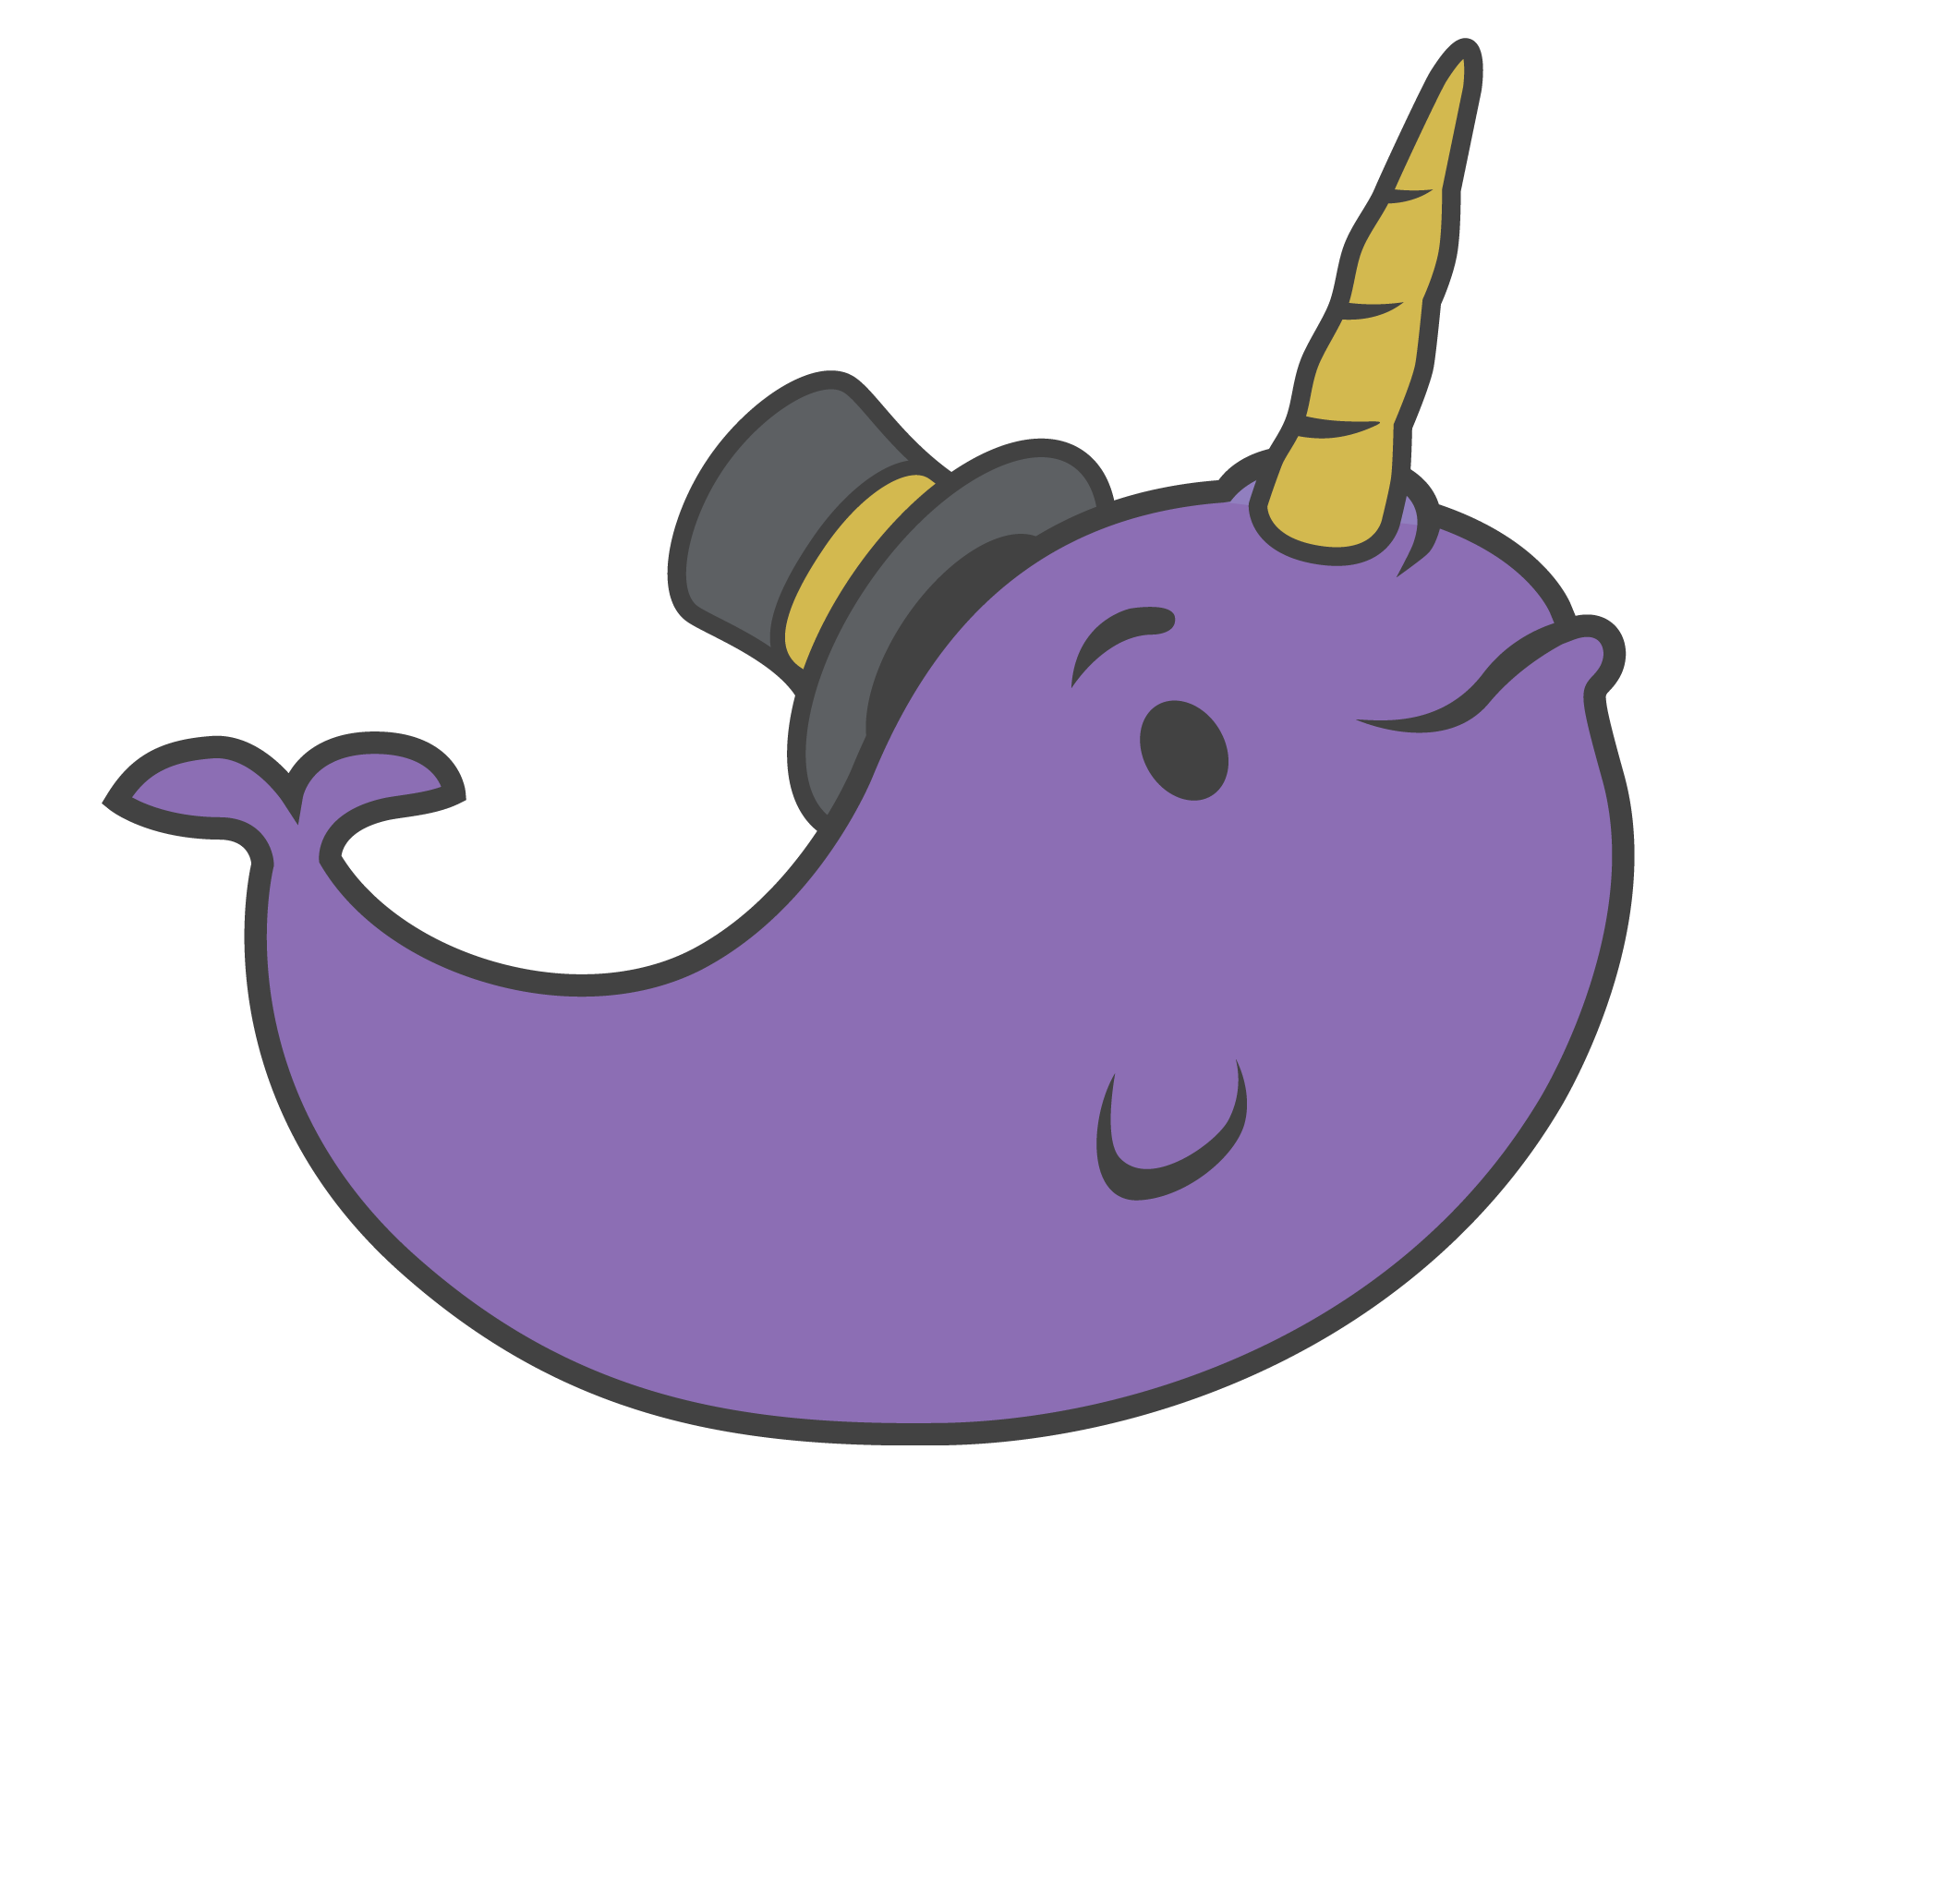 Narwhal Cartoon Clip Art - Narwhal Cartoon Png (3216x2318)